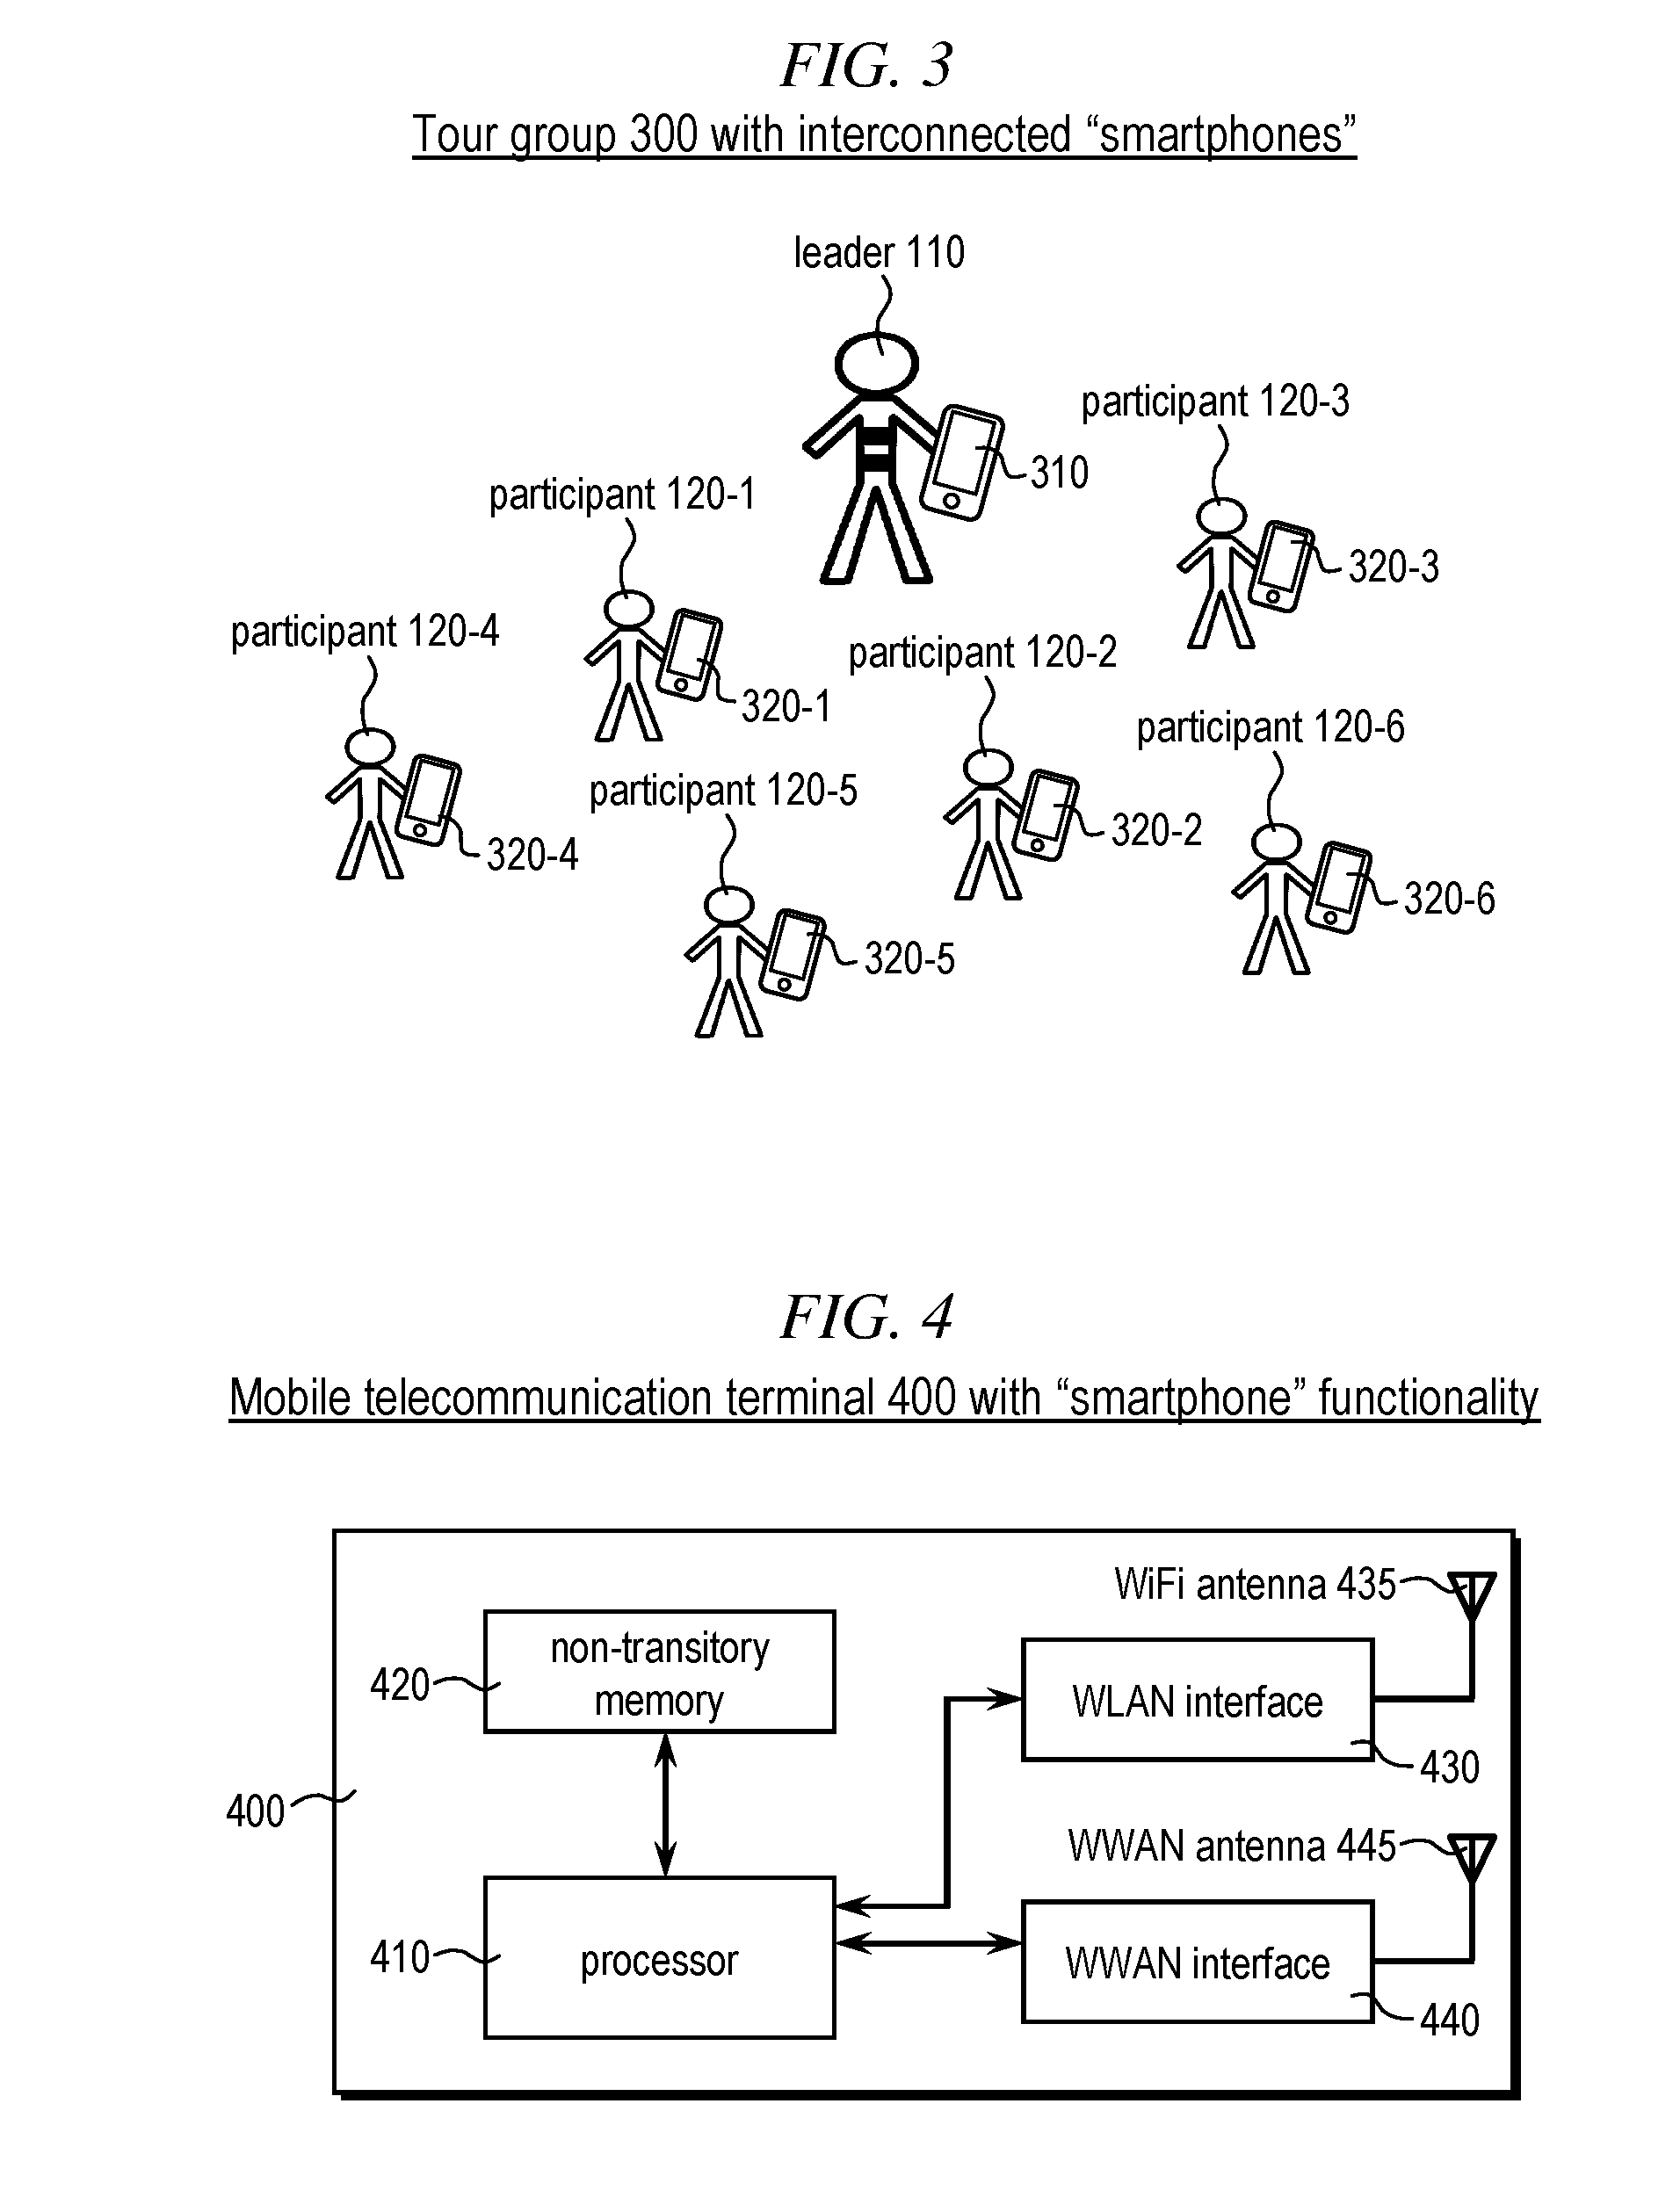 System for Maintaining the Integrity of a Tour Group